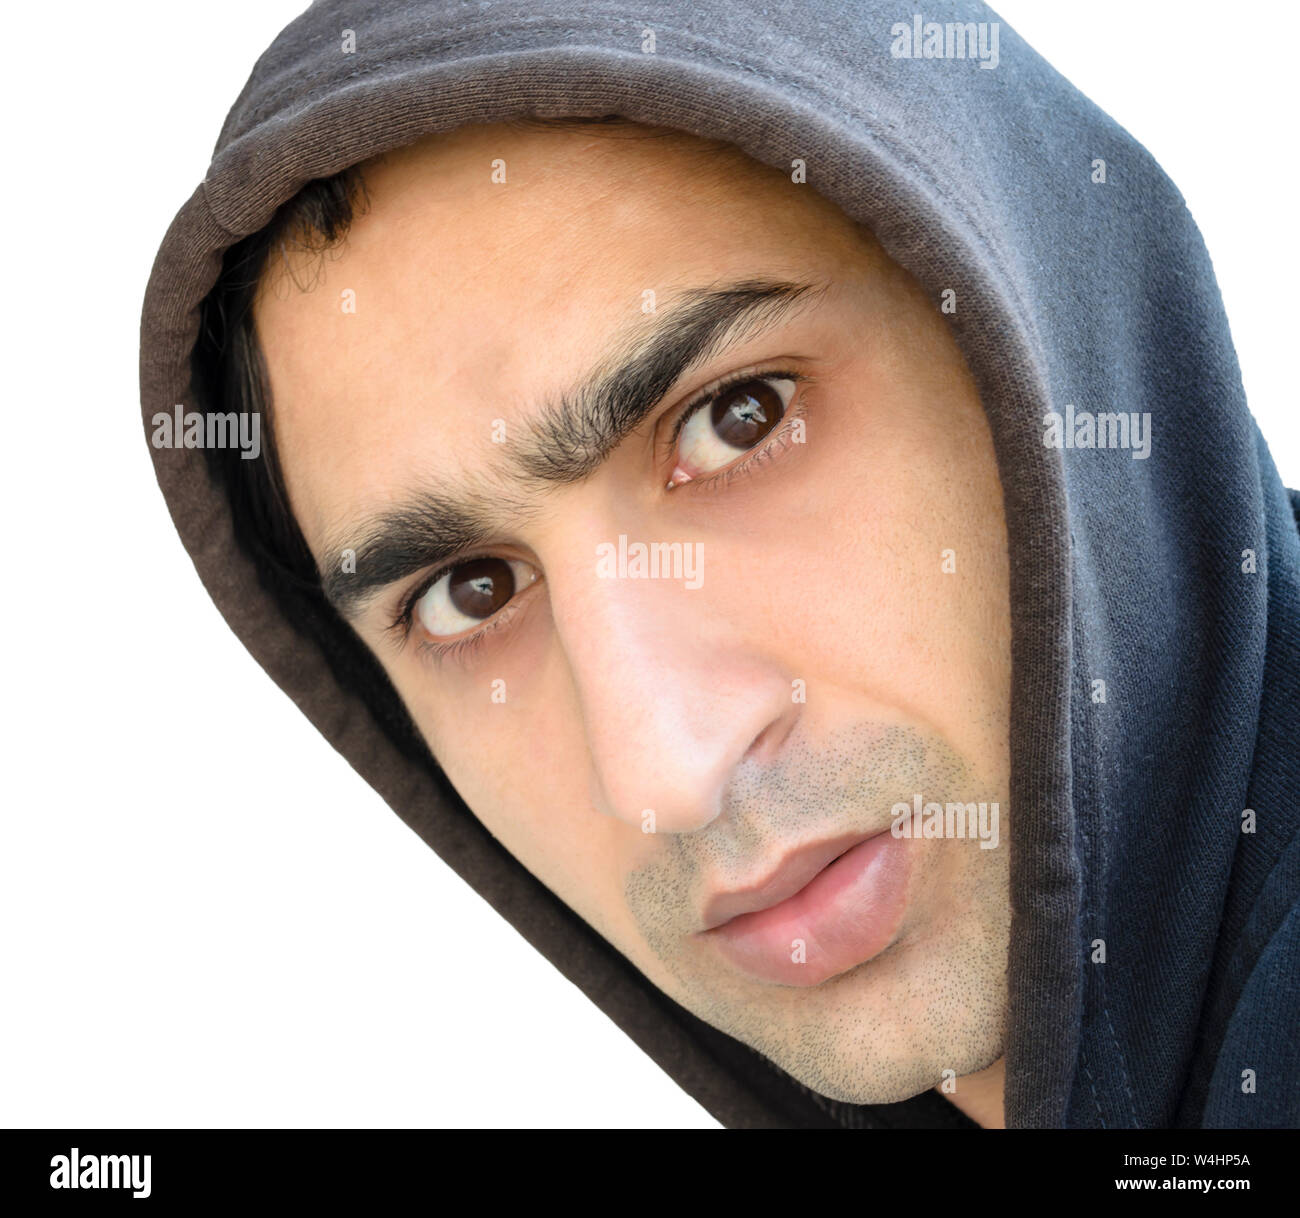 Portrait of a young man wearing hoodie Stock Photo